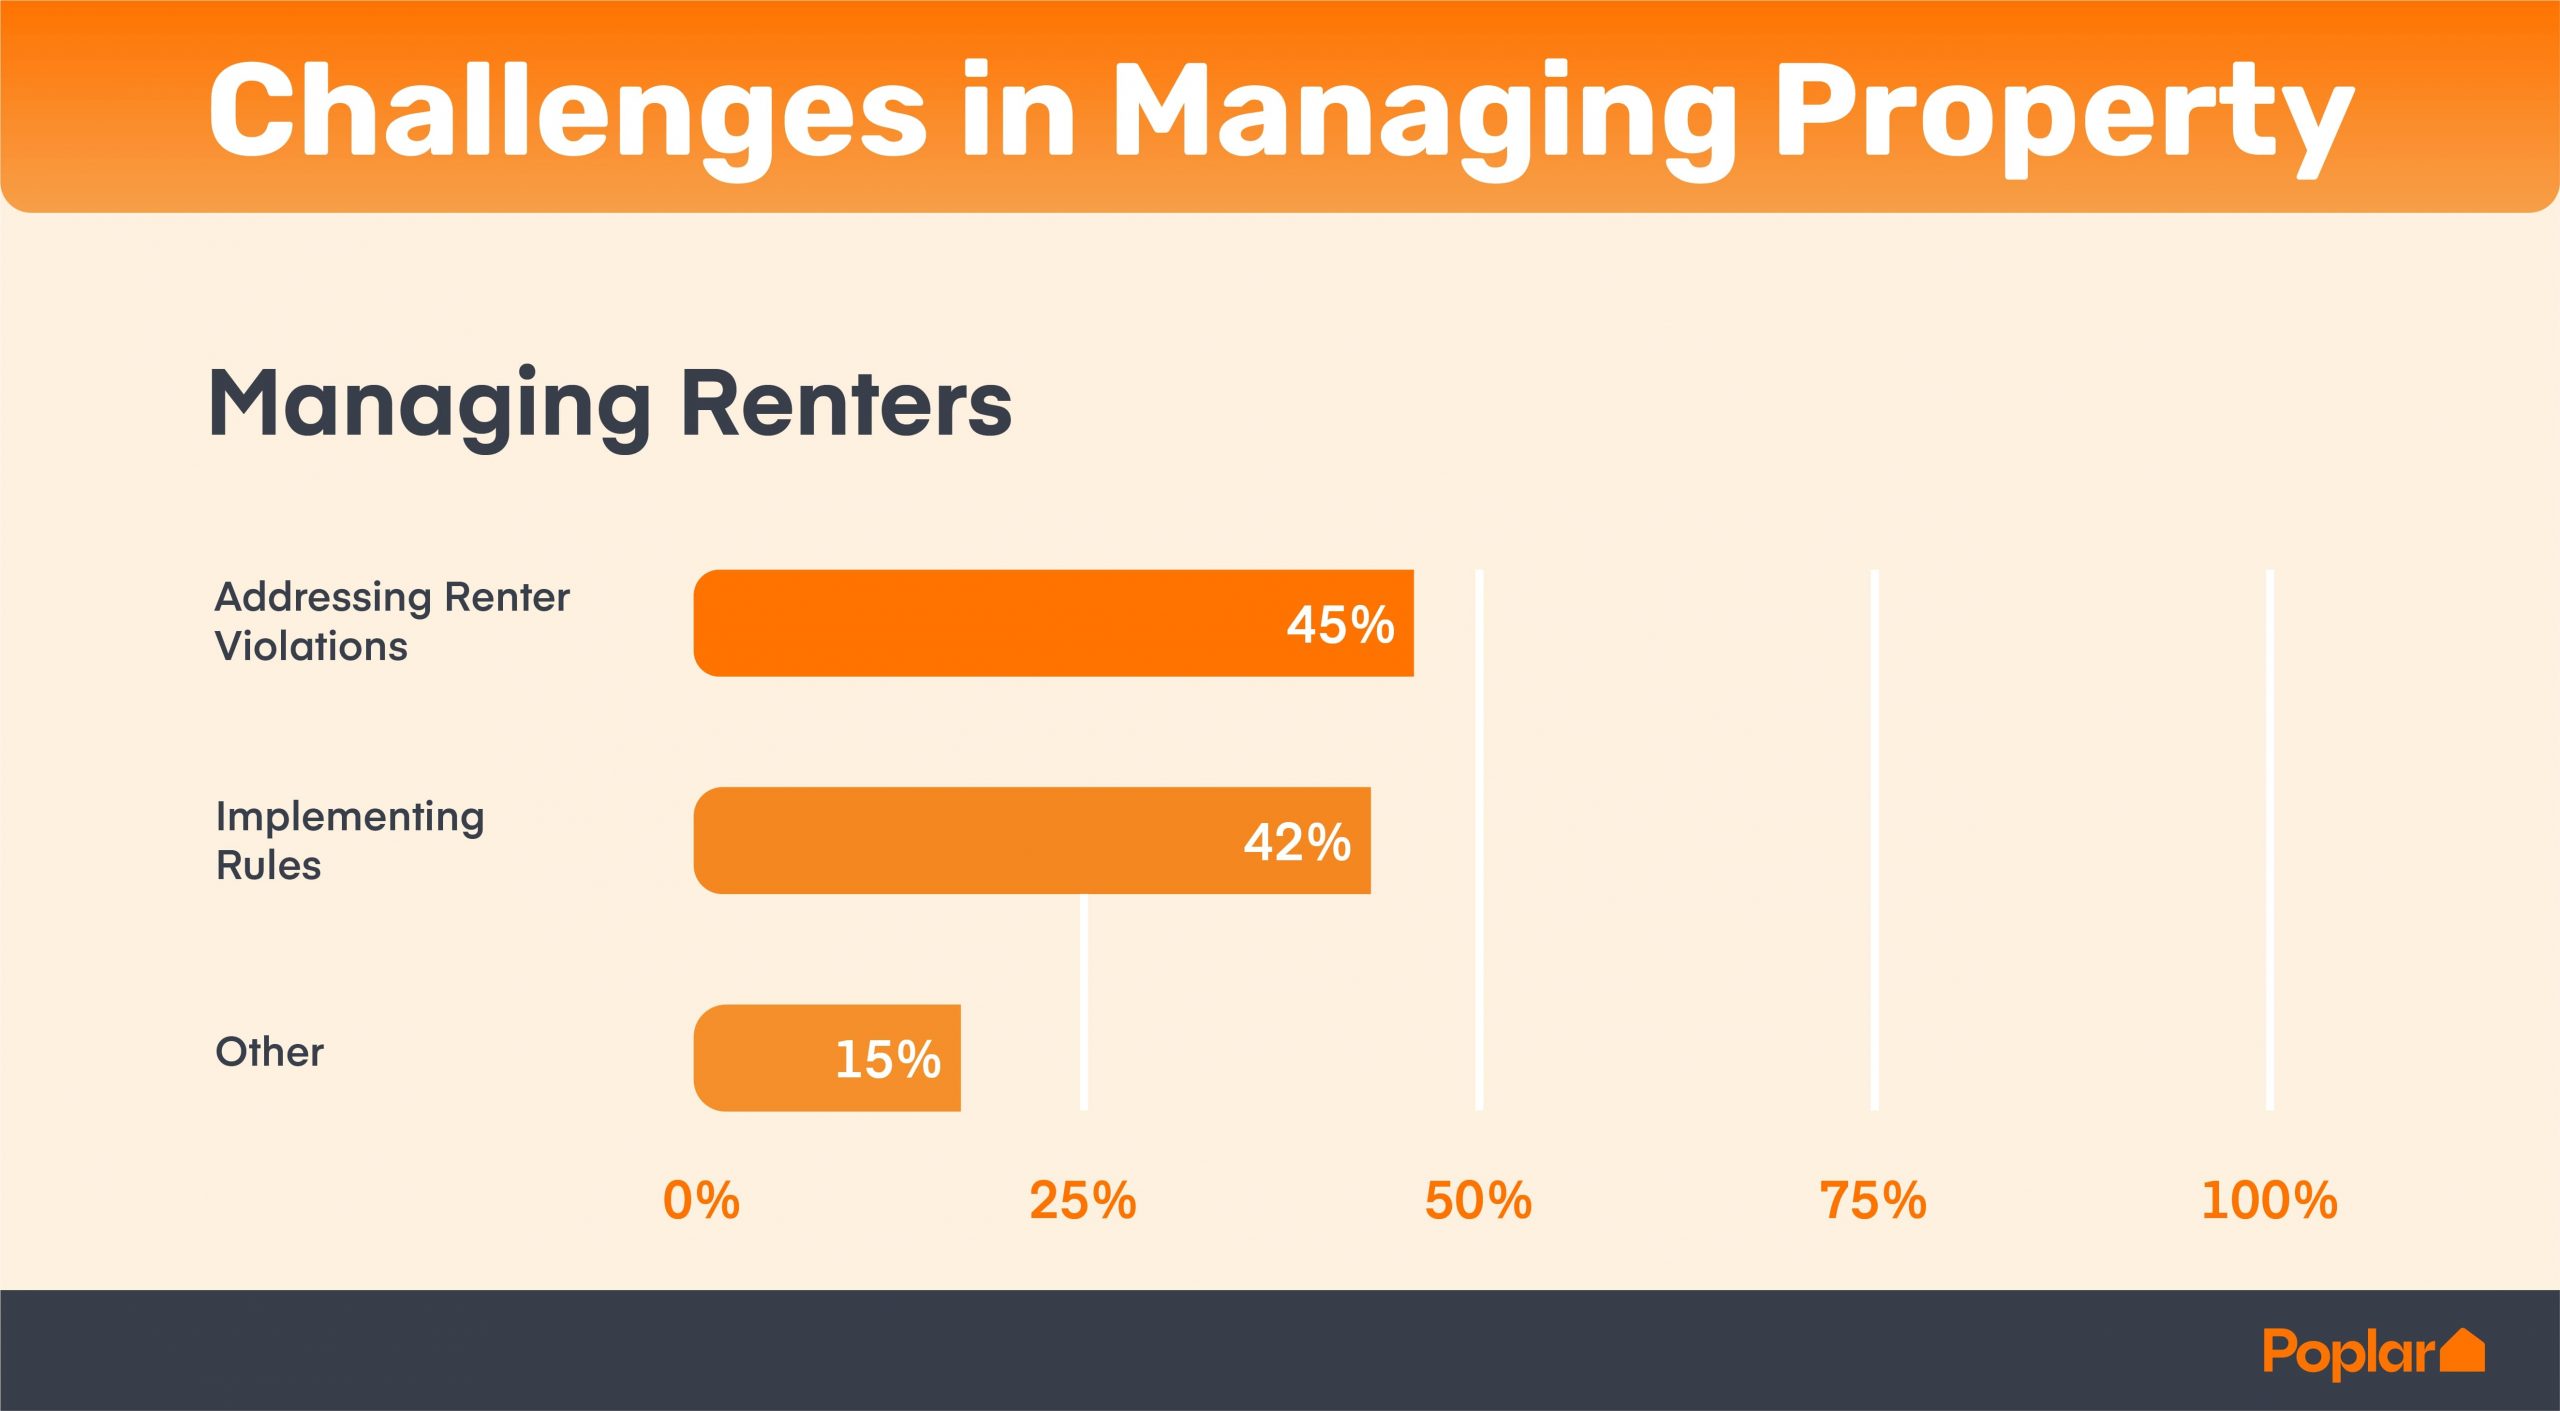 A table showing the challenges in managing renters